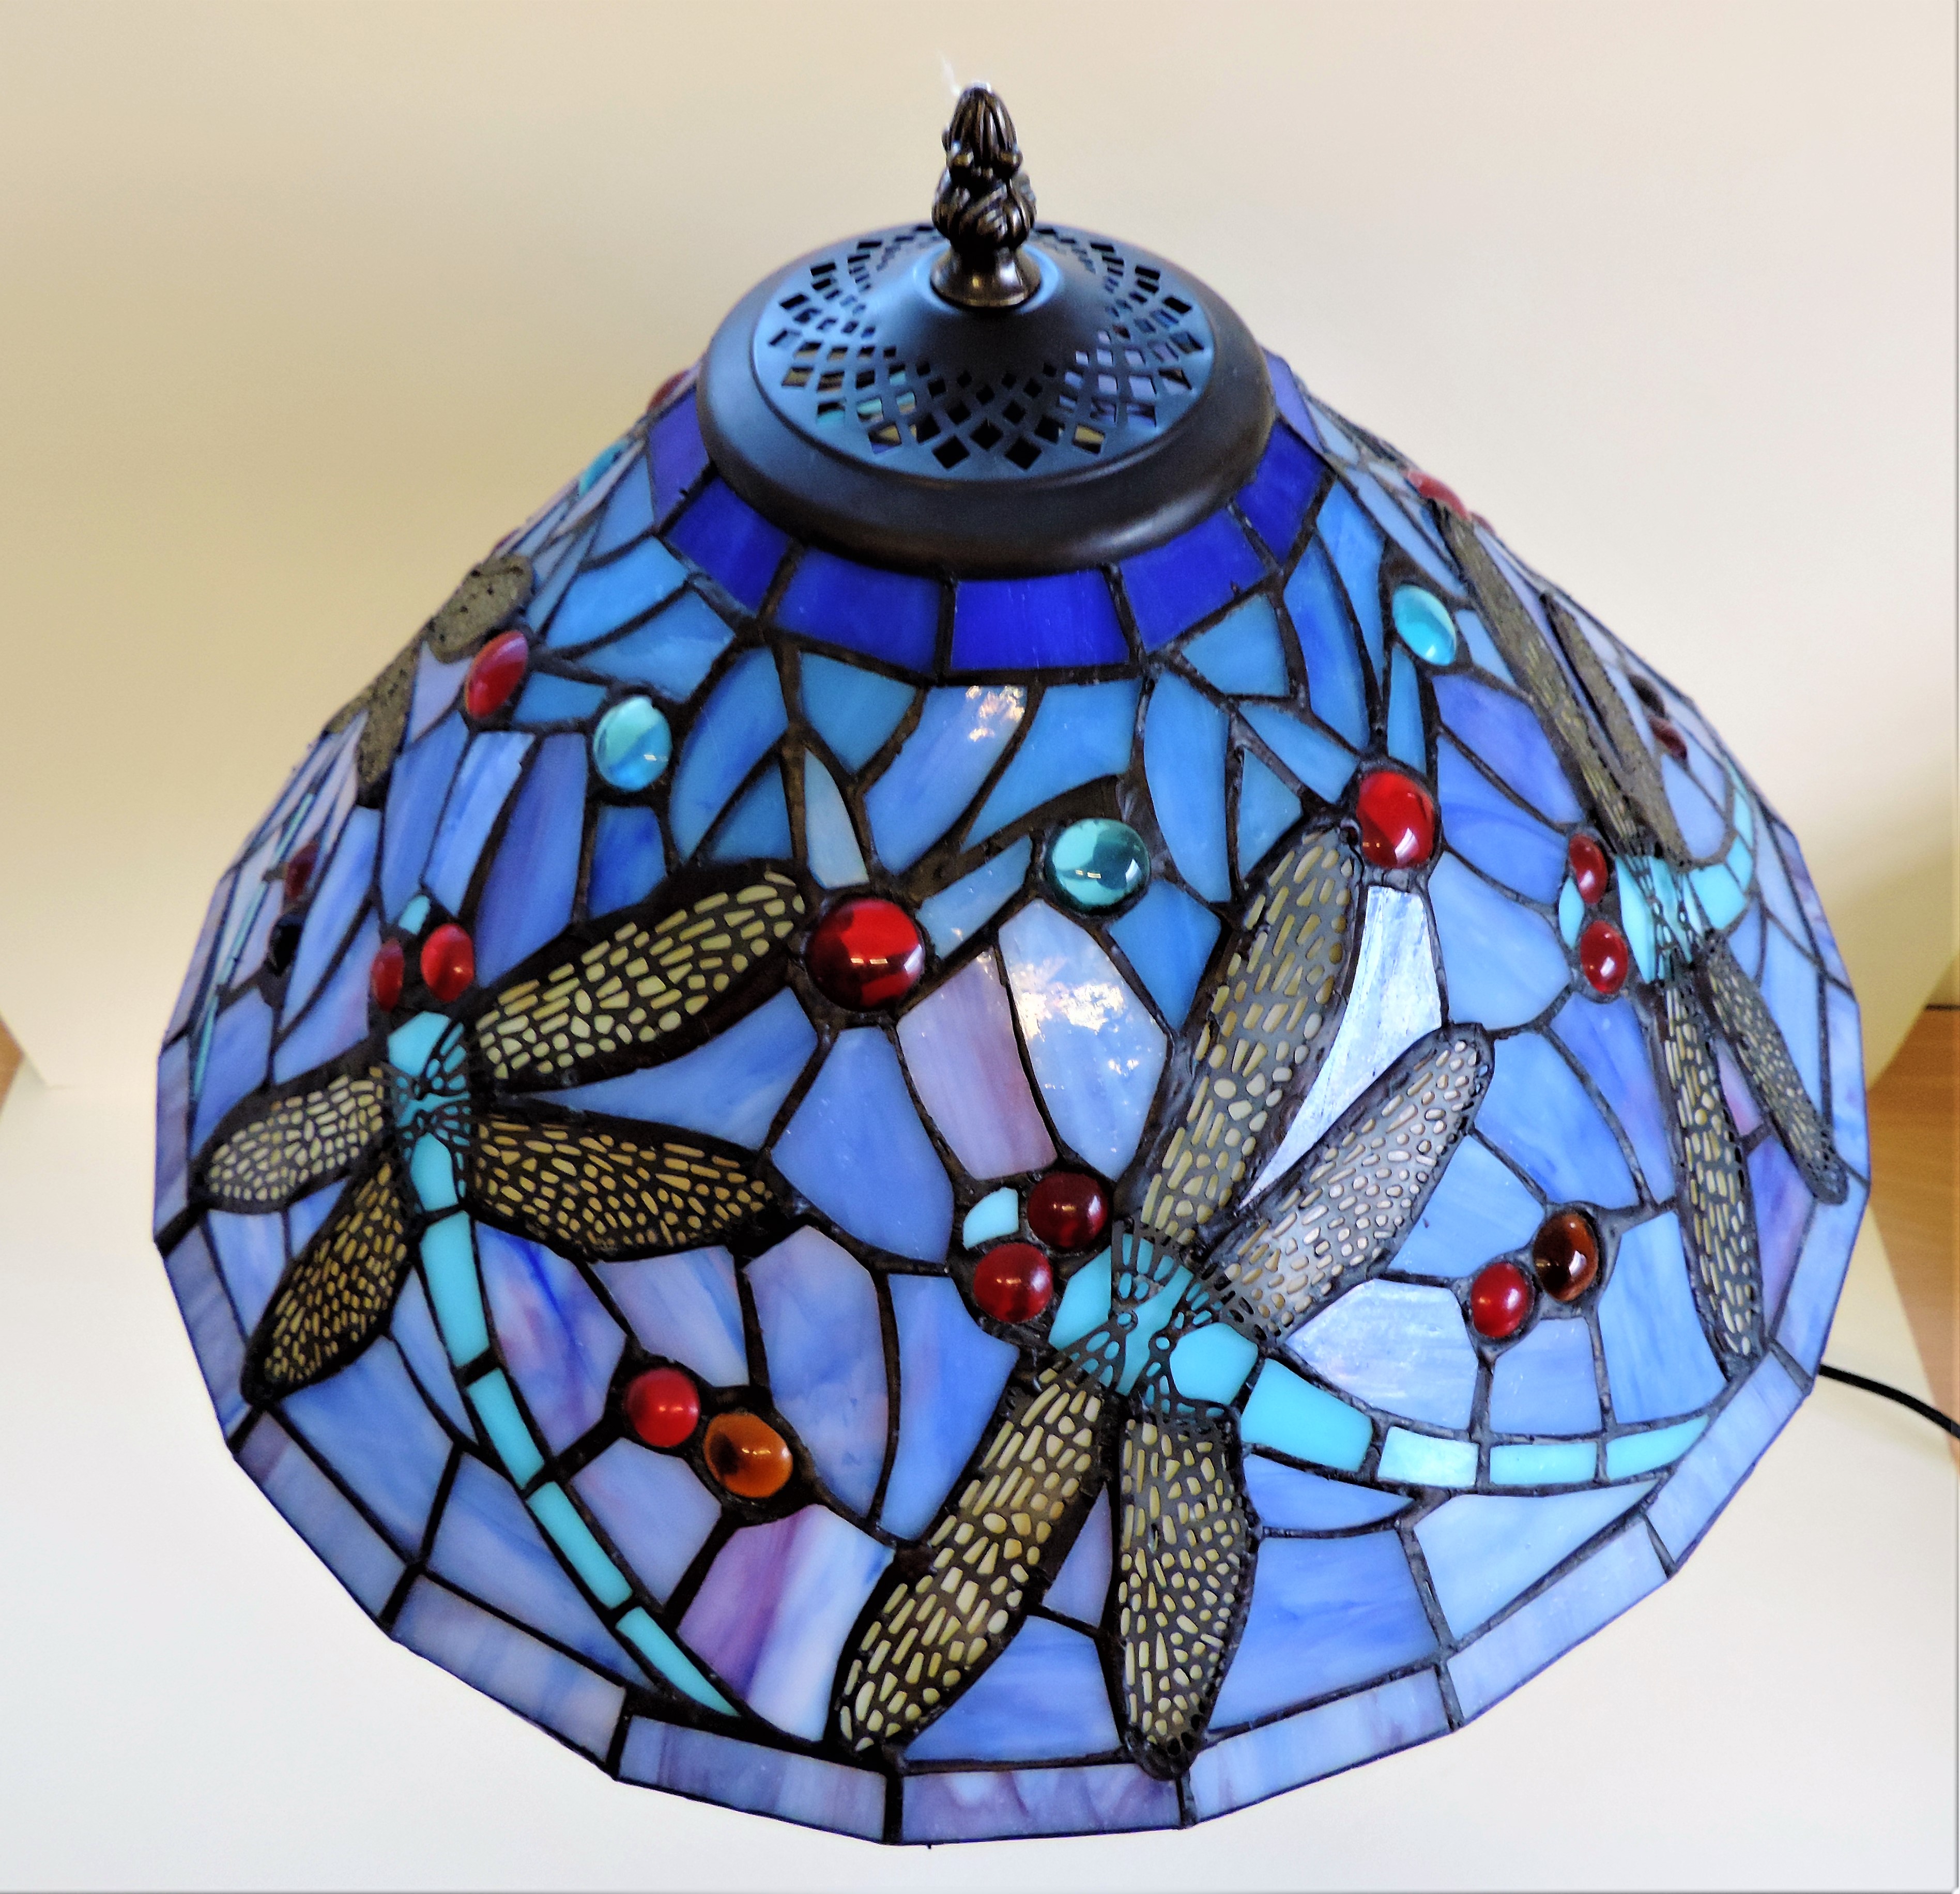 22inch Tall Dragonfly Tiffany Lamp - Image 4 of 6